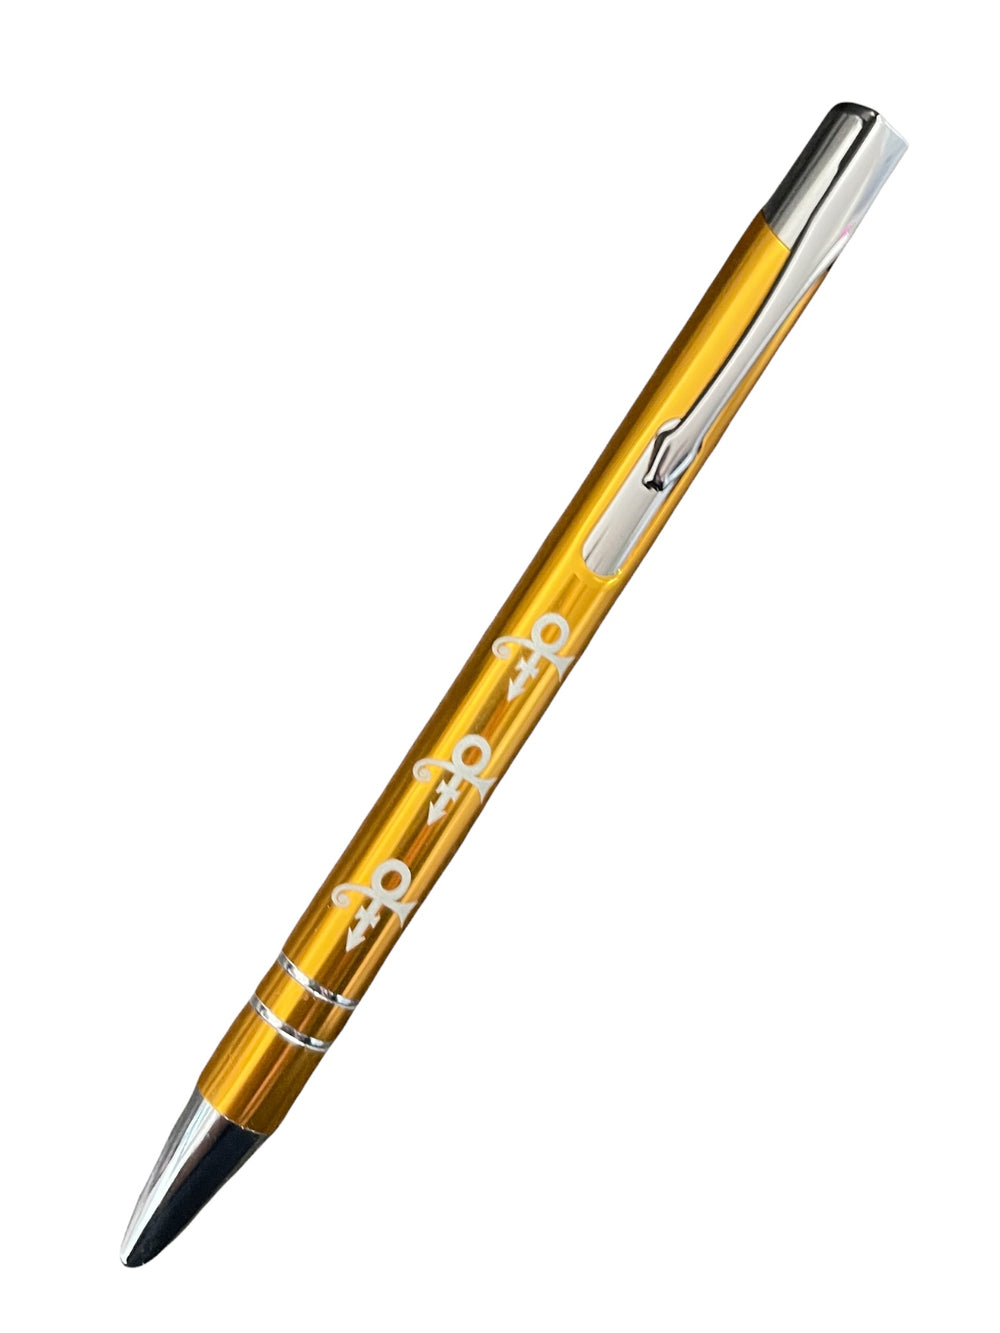 Prince – Official Xclusive THE GOLD EXPERIENCE Love Symbol Estate Authorised Engraved Metal Pen